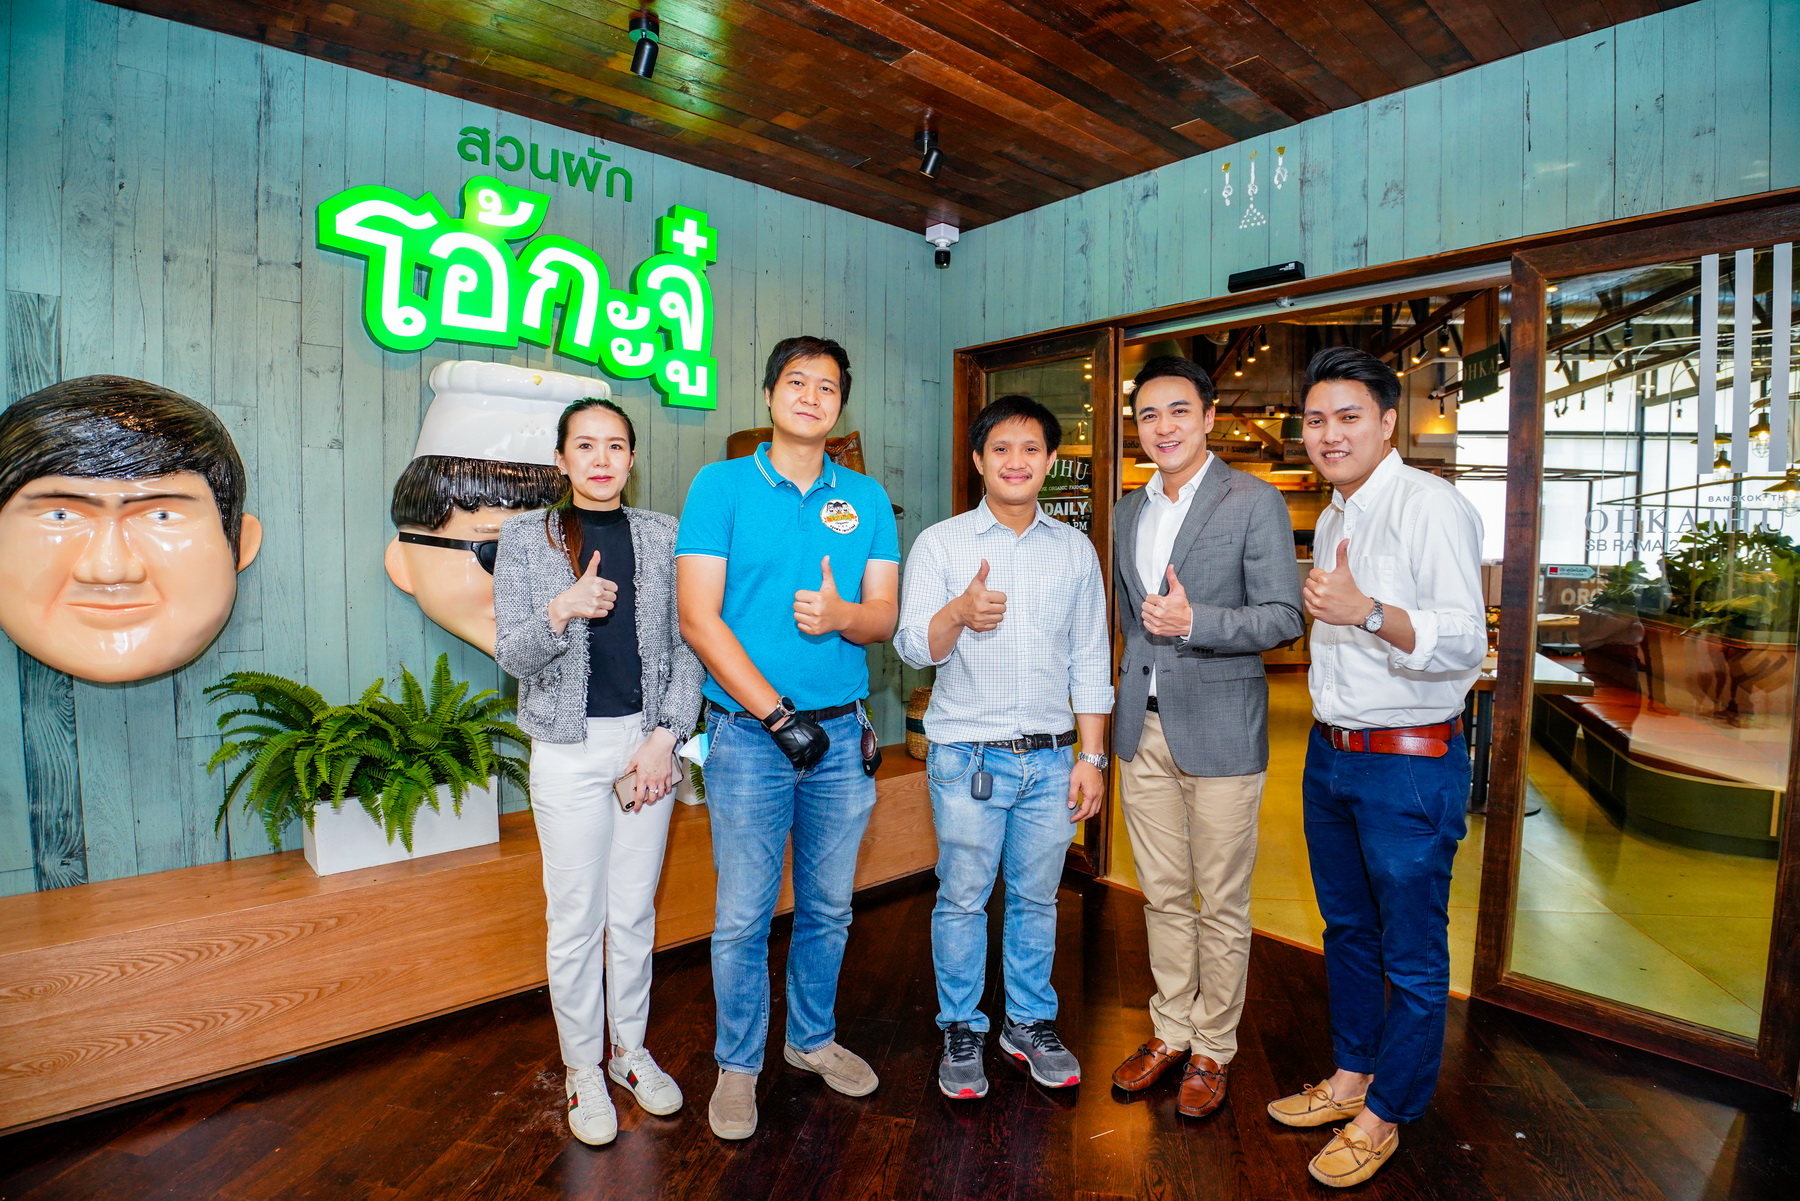 Photo Release: KTC jointly congratulates Ohkajhu for its grand opening of a new branch on Rama II, letting cardmembers dine deliciously with free strawberry yogurt smoothies.